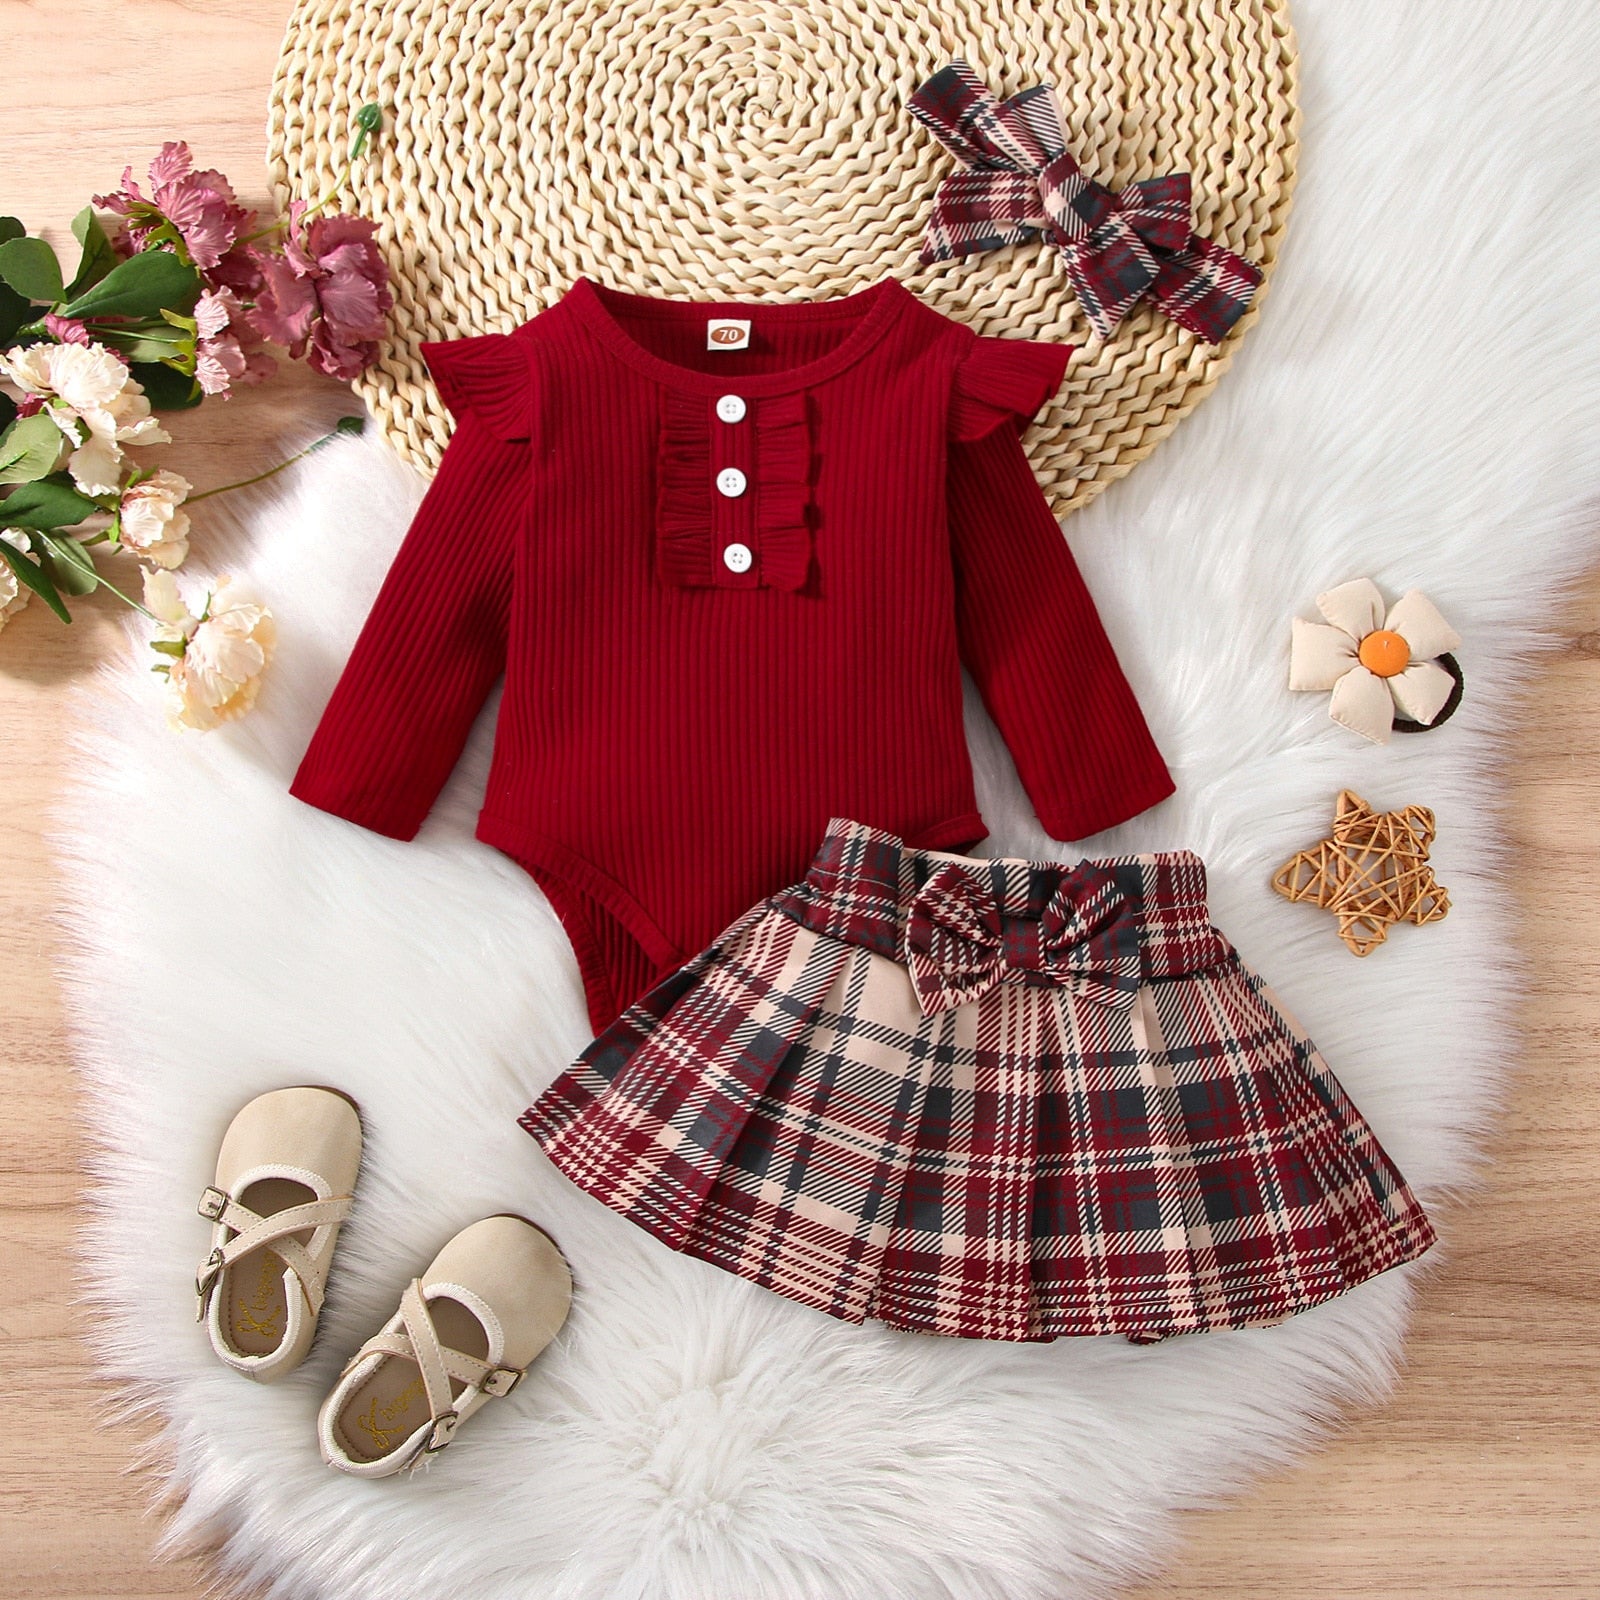 Baby Girl Outfit Sets - Pink Dots Lace Romper+Layered Denim Skirts